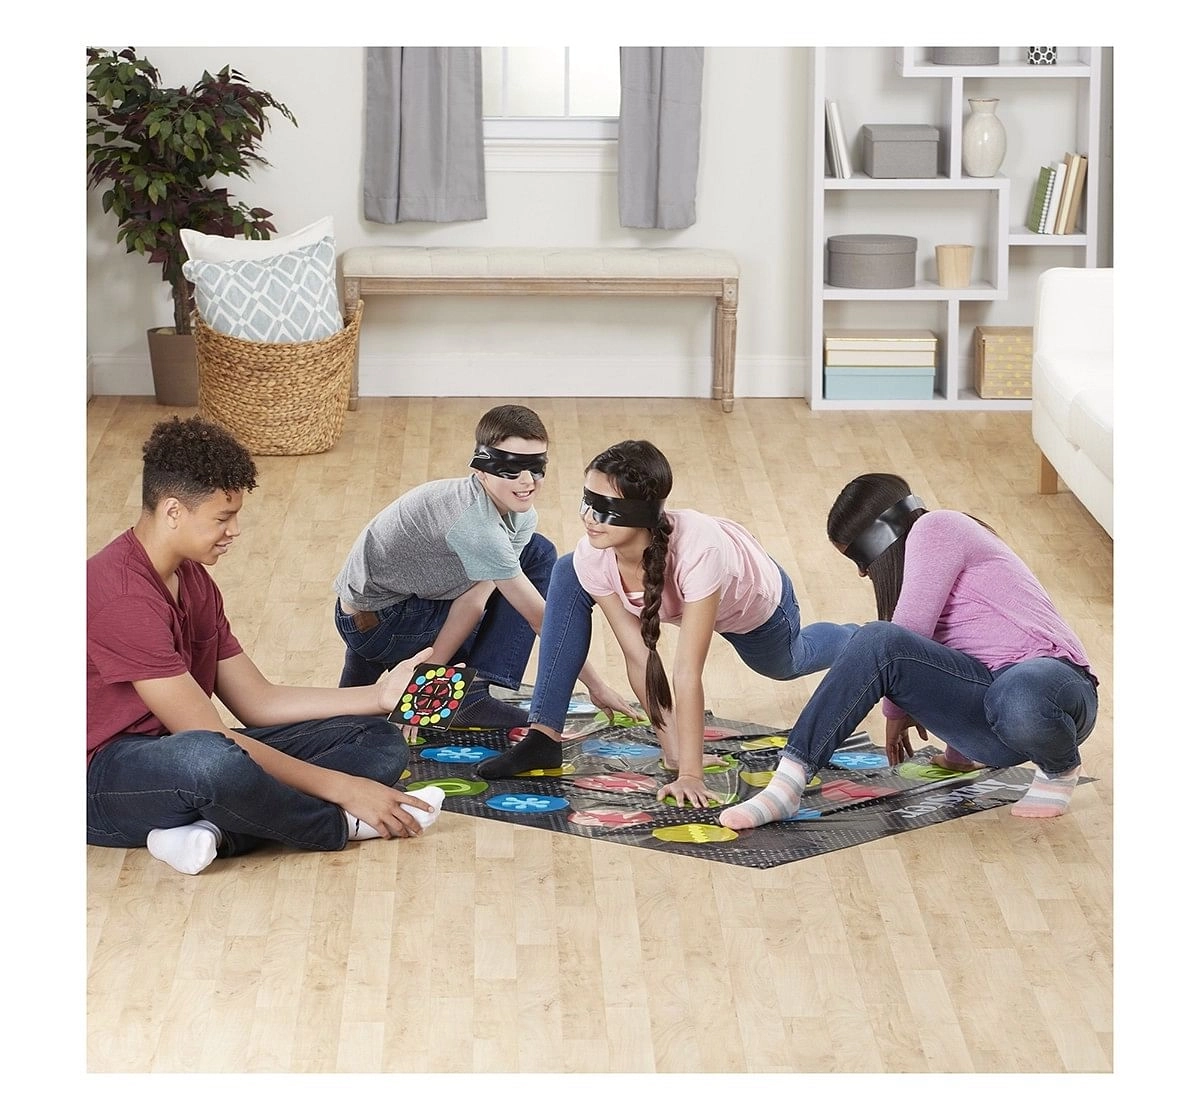 Hasbro Blindfolded Twister Board Games for Kids age 8Y+ 